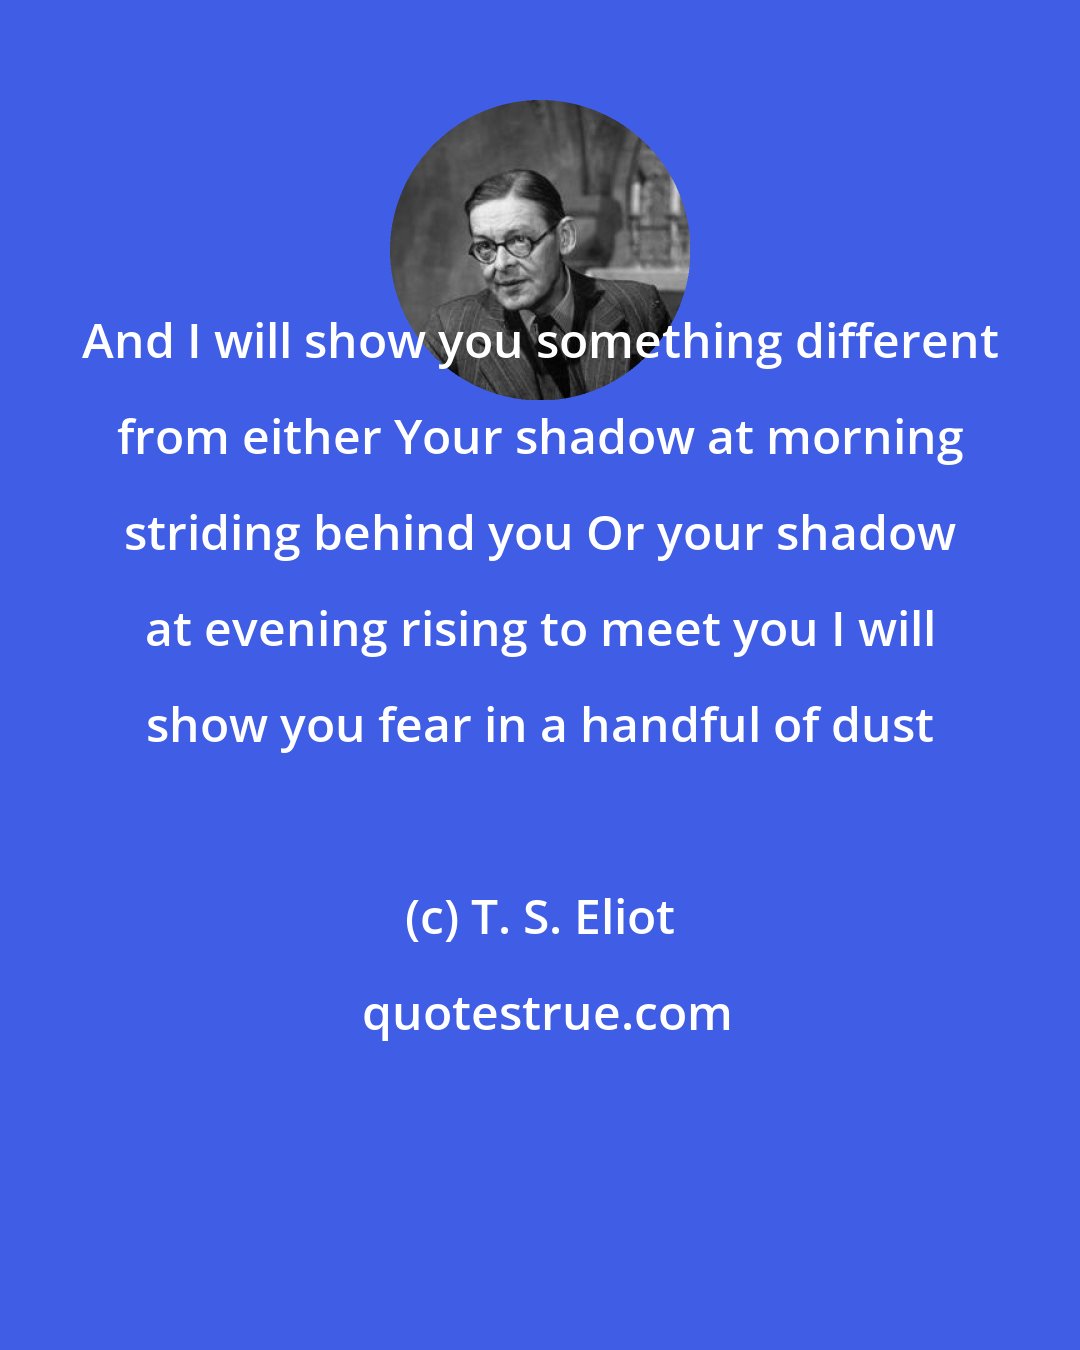 T. S. Eliot: And I will show you something different from either Your shadow at morning striding behind you Or your shadow at evening rising to meet you I will show you fear in a handful of dust